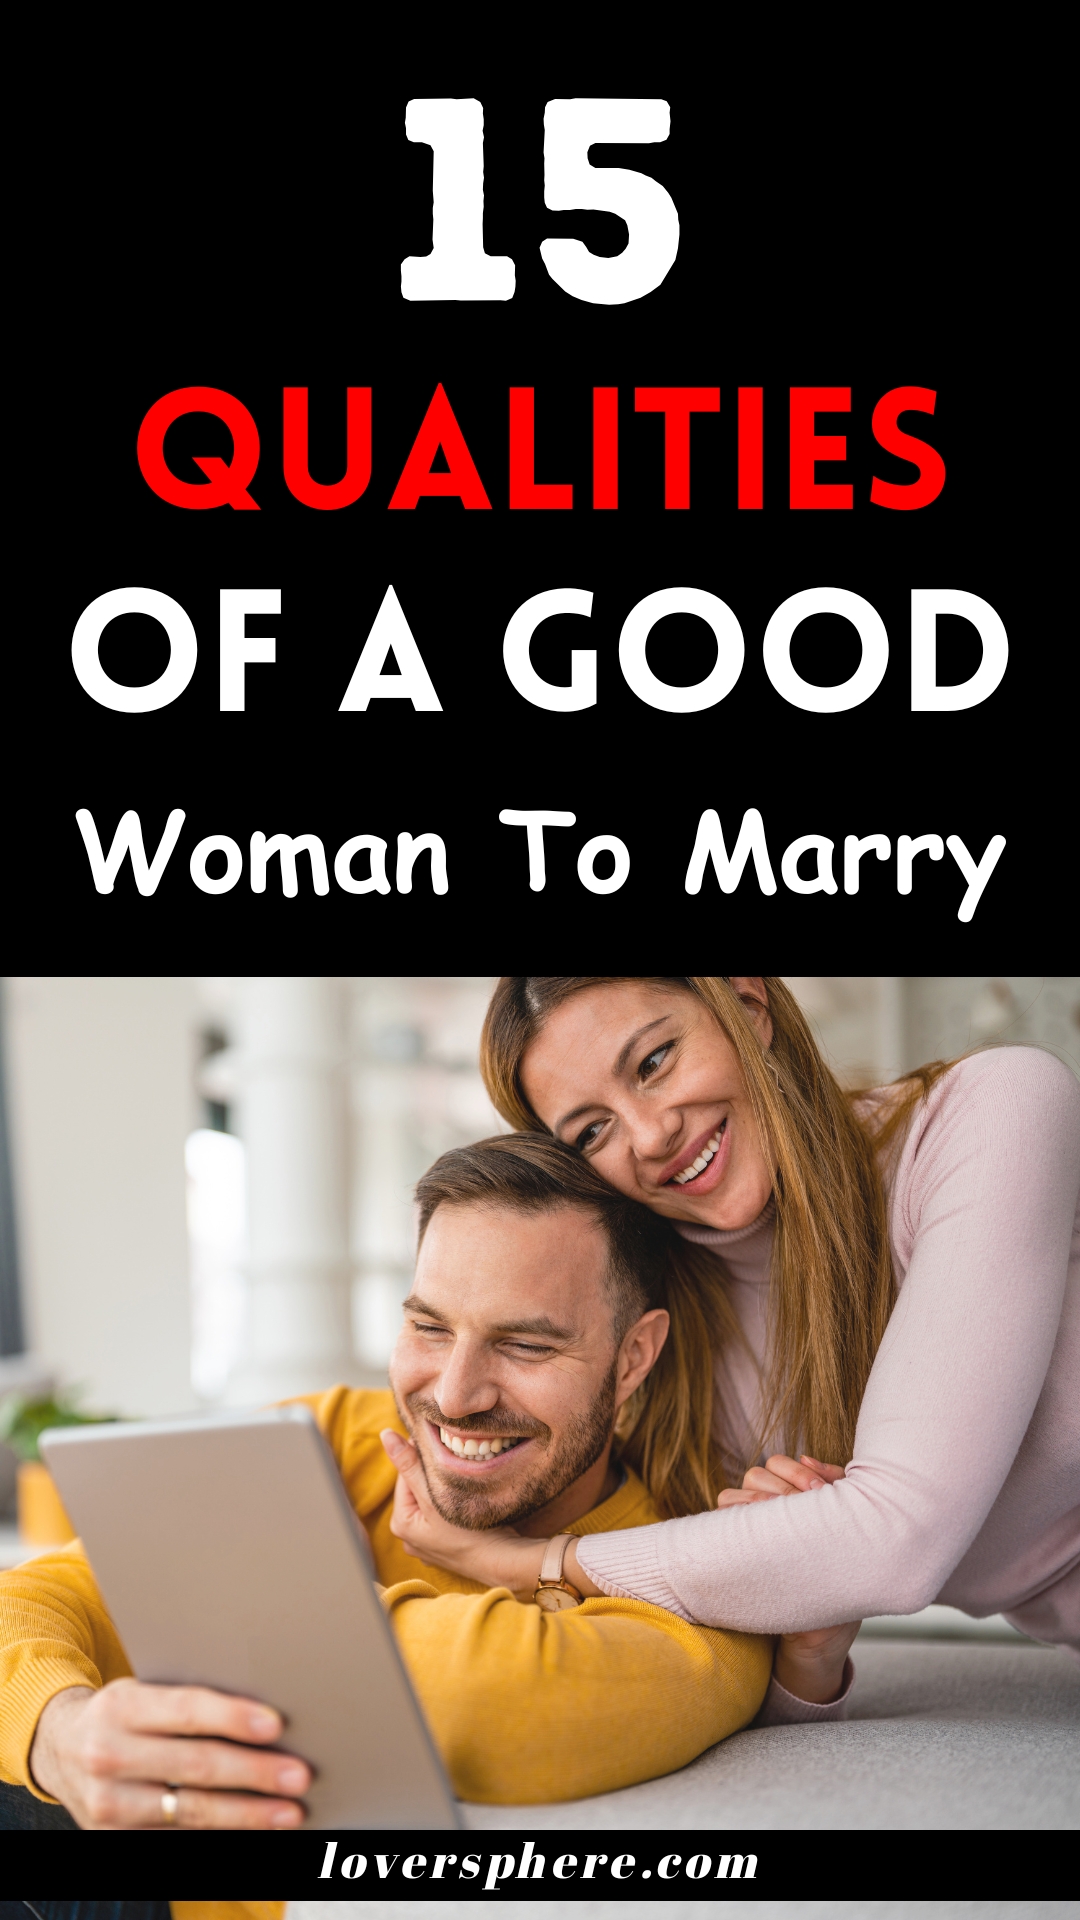 qualities of a good woman to marry